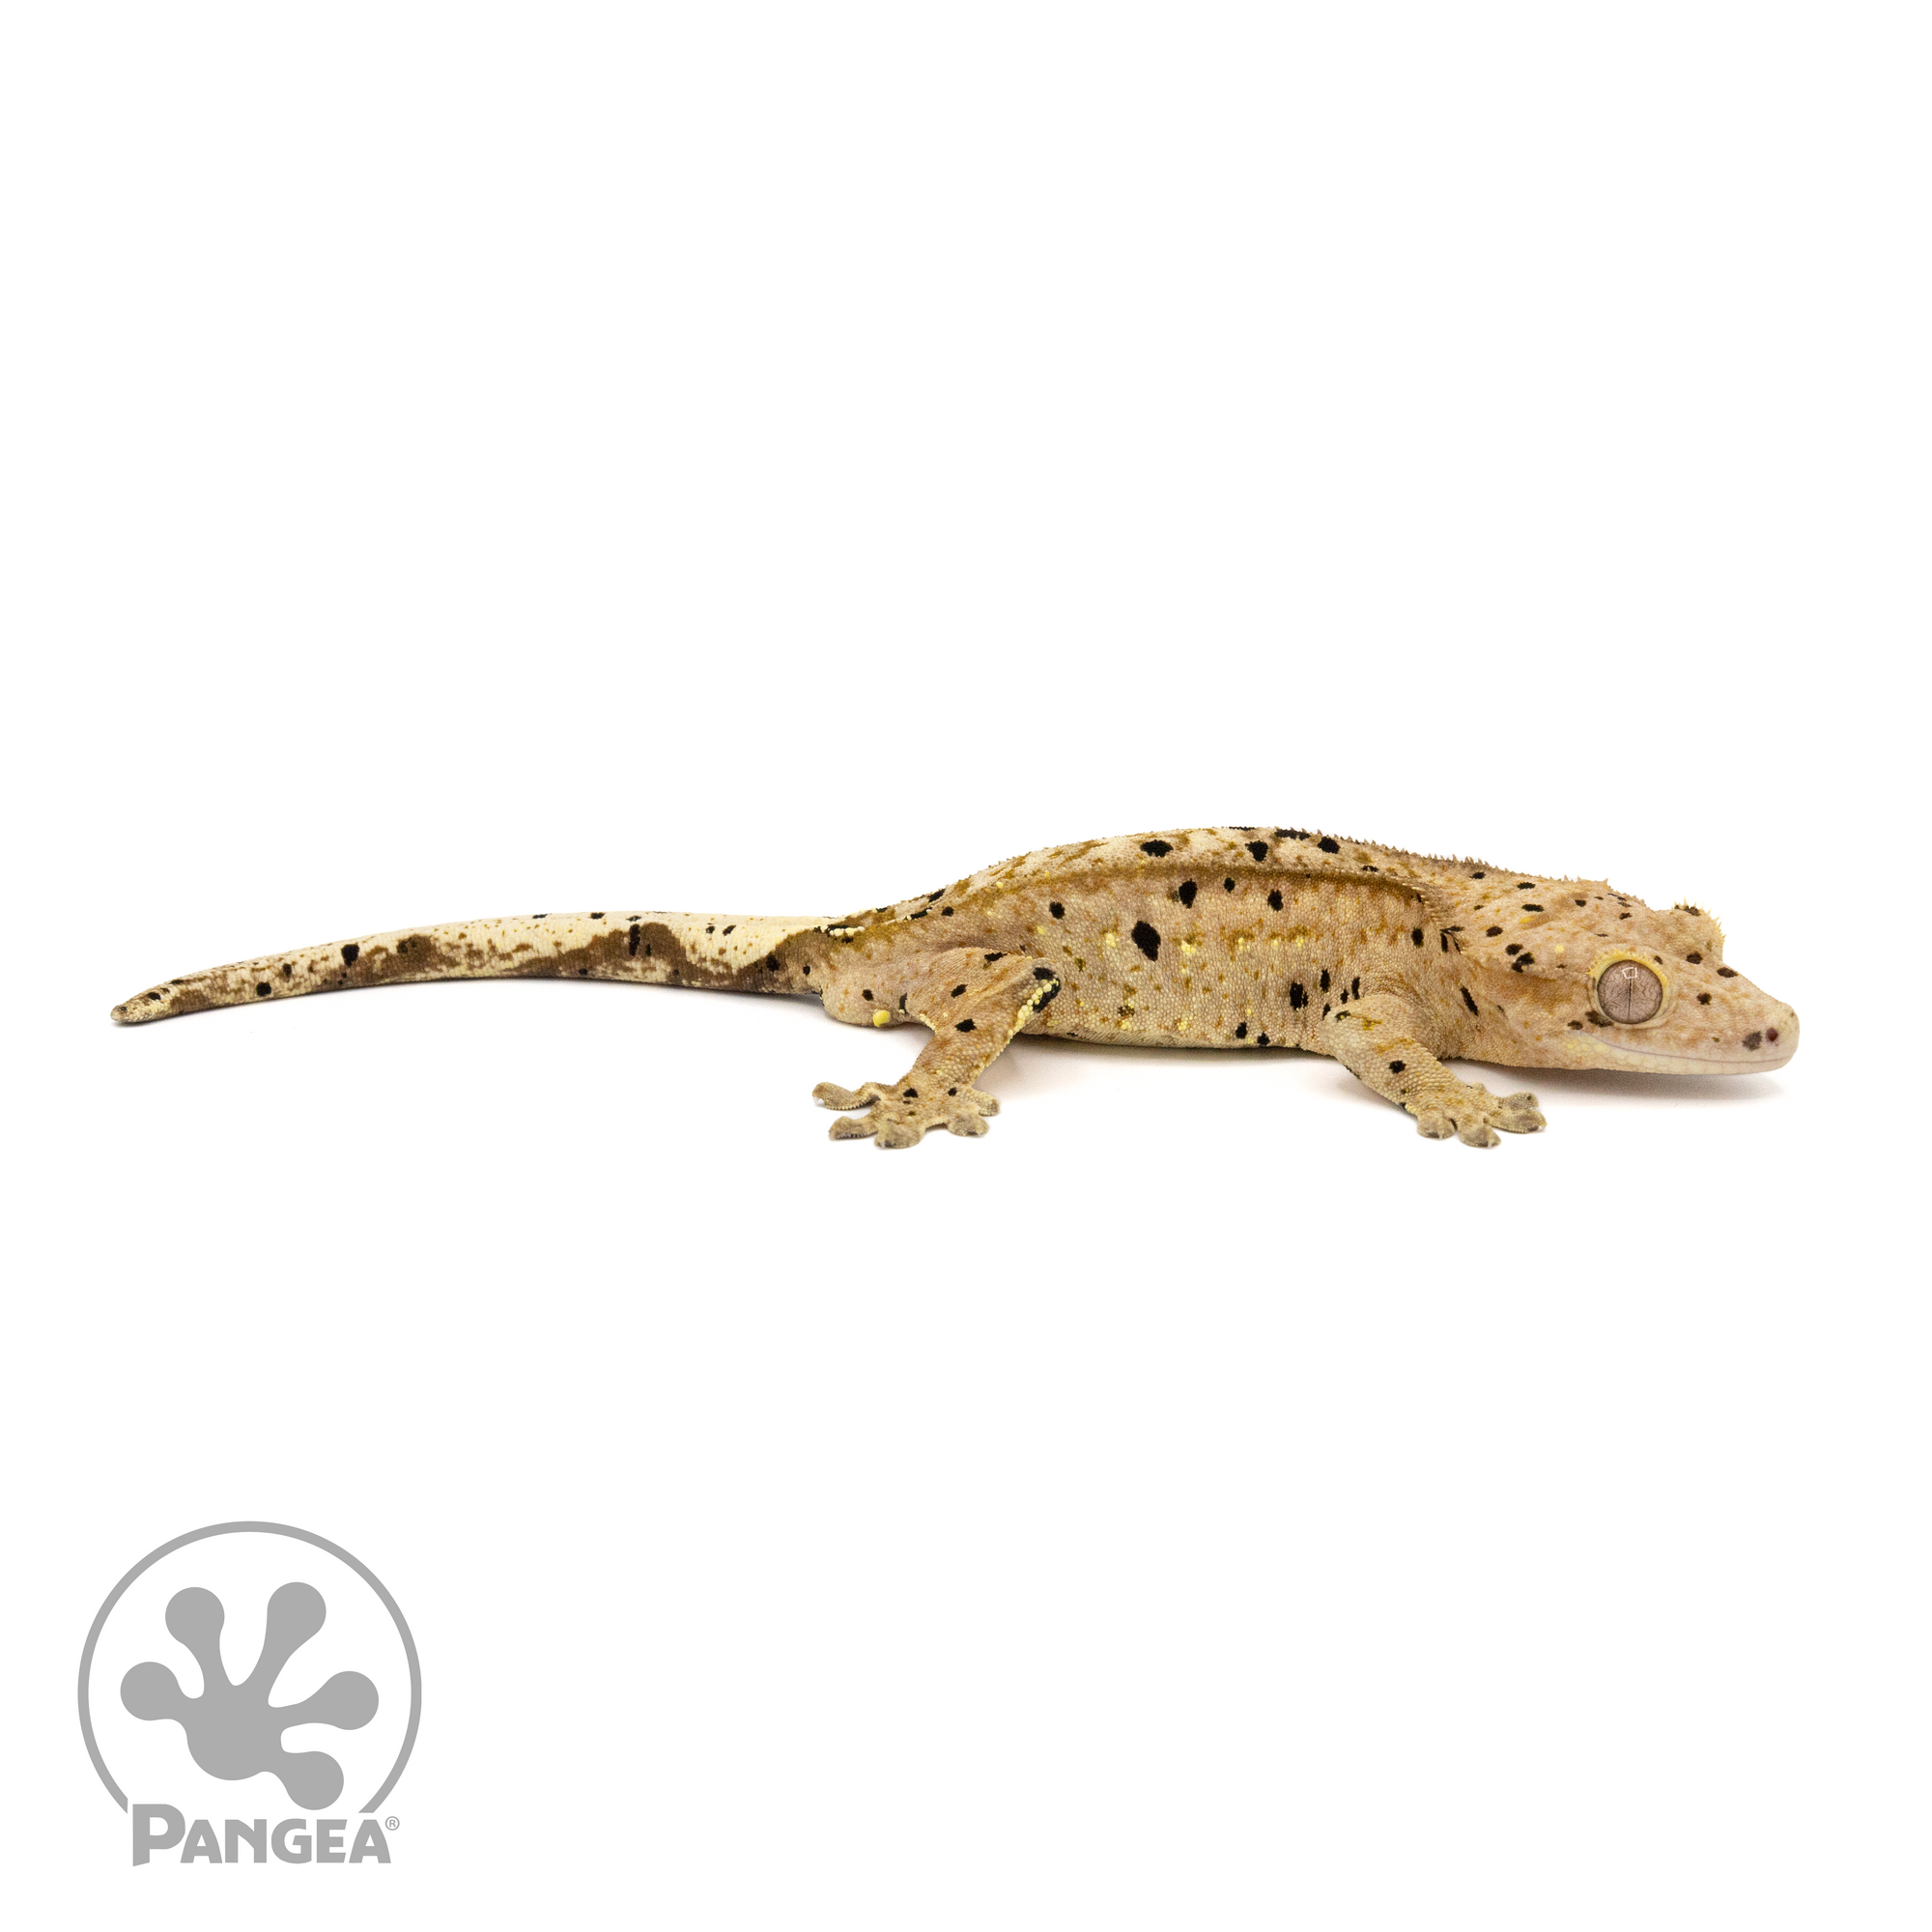 Male Super Dalmatian Crested Gecko Cr-1271 looking right 